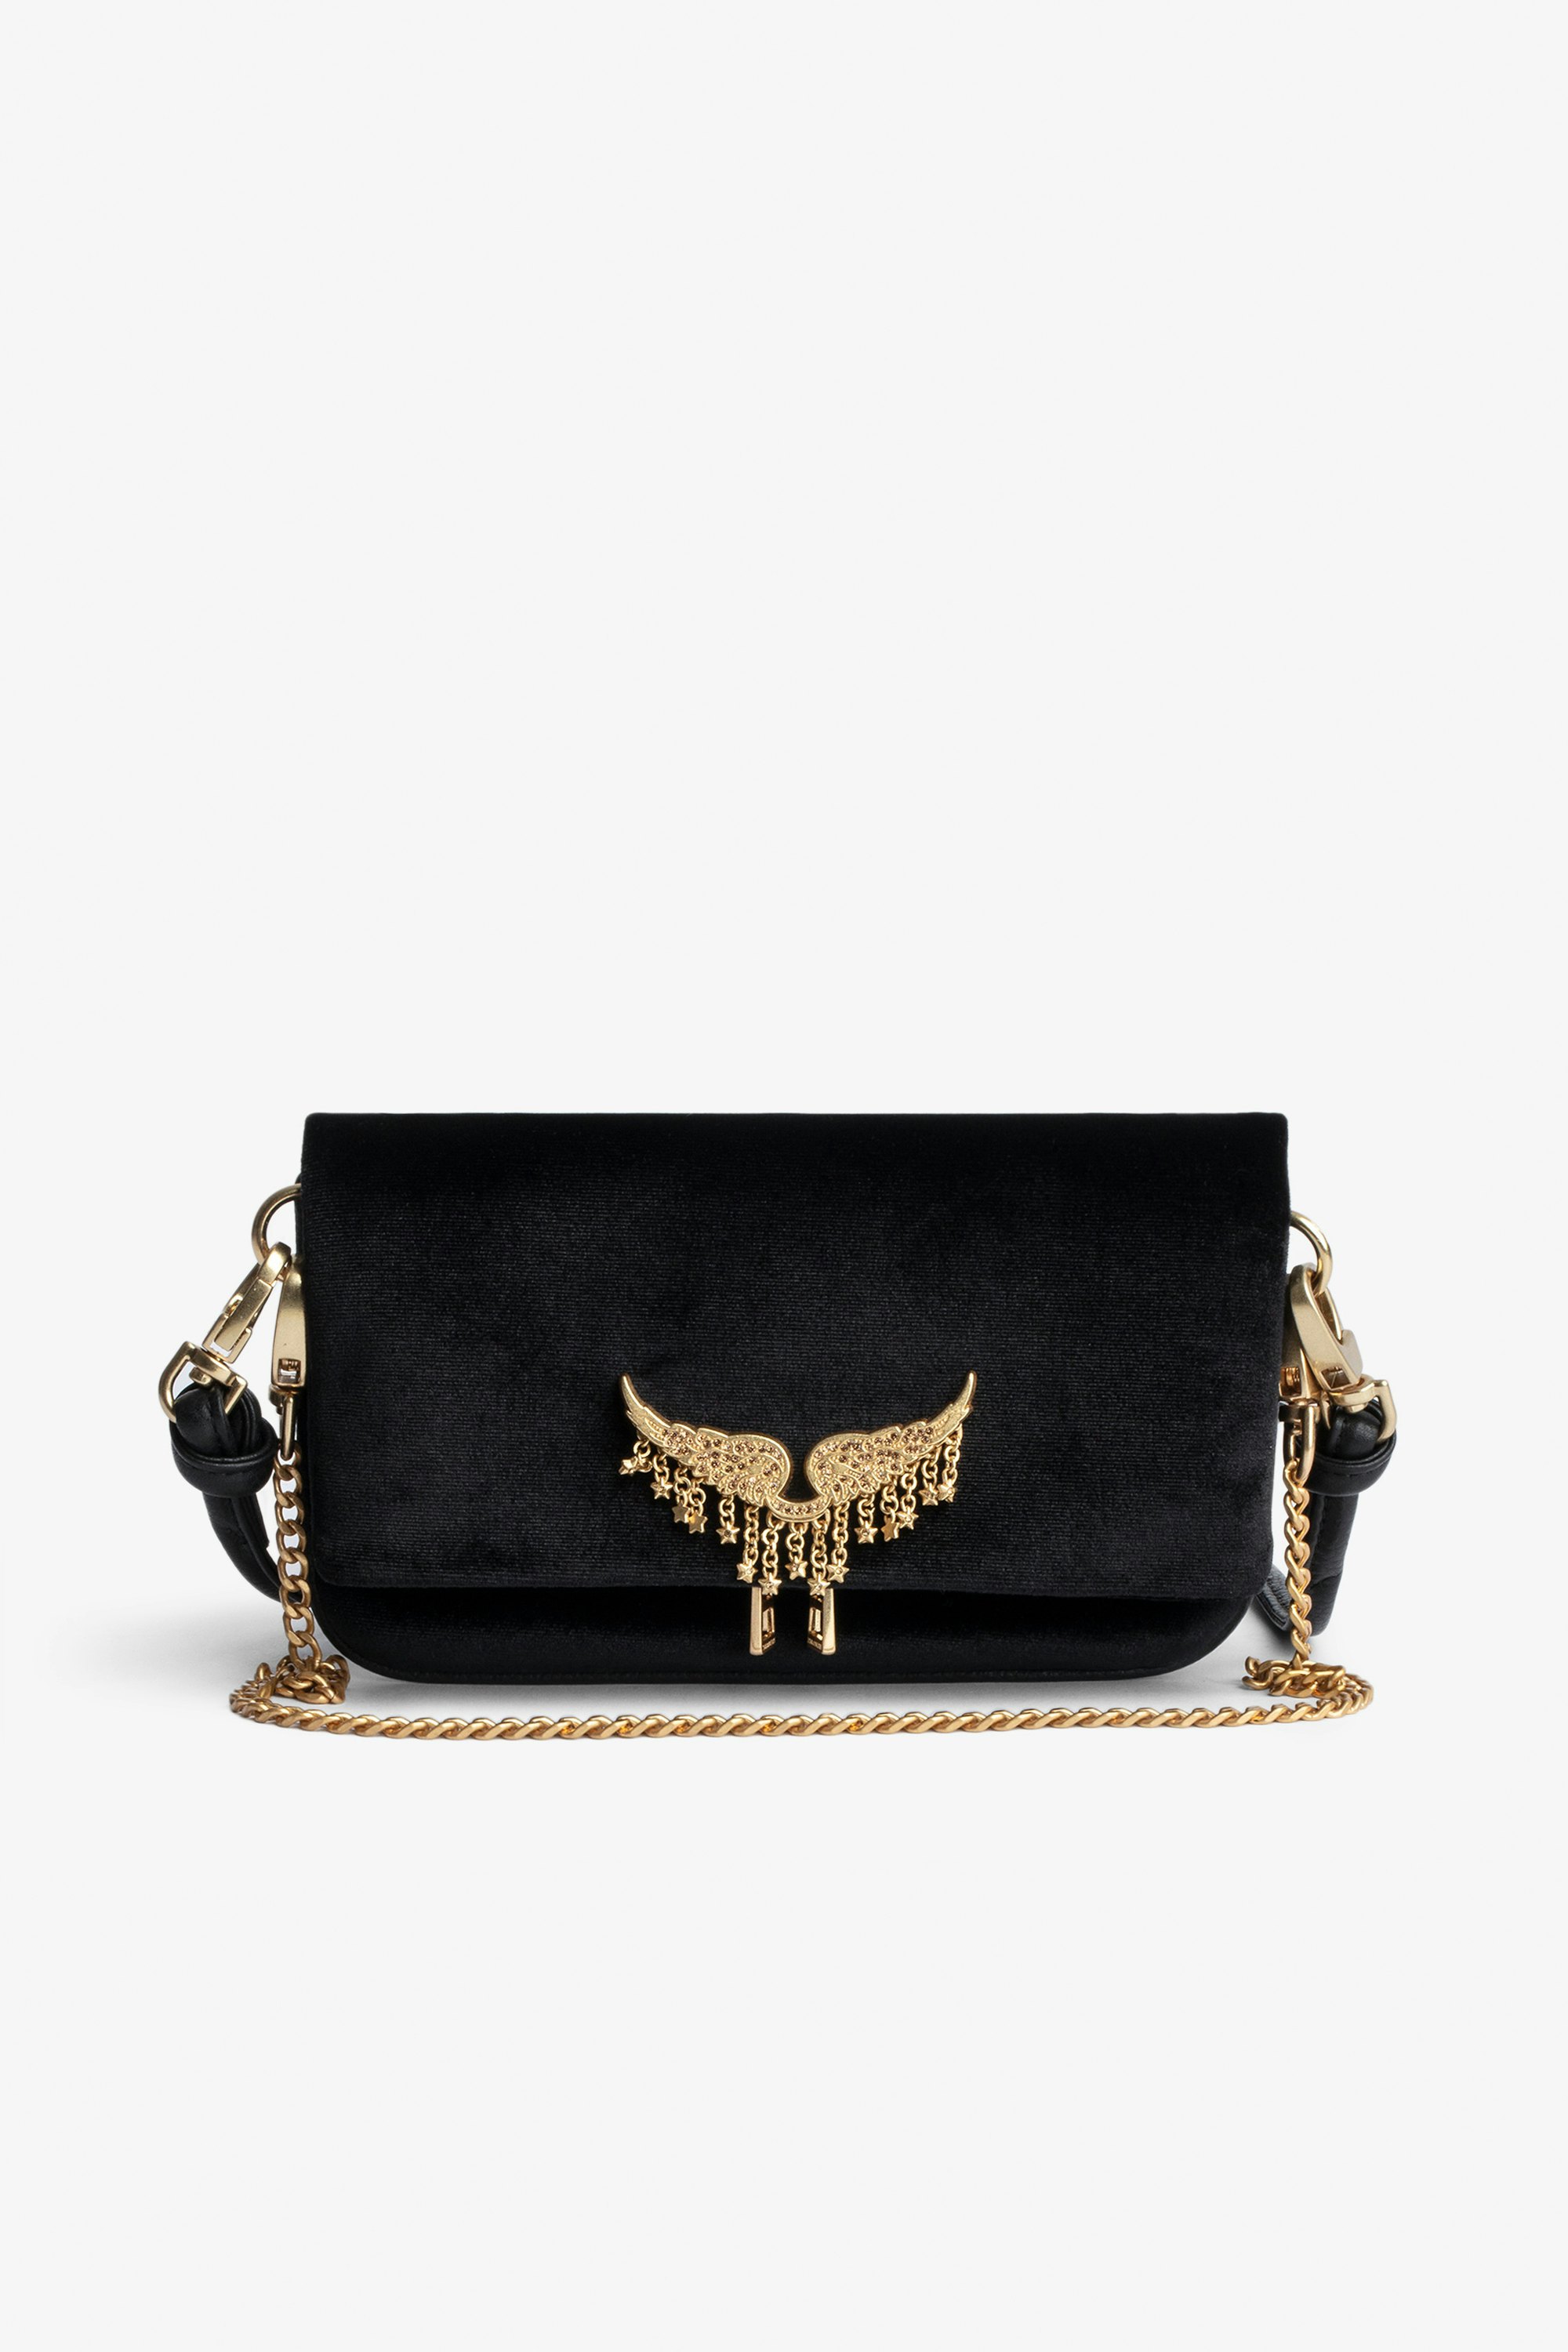 Velvet Rock Nano Clutch Women’s Rock Nano clutch in black velvet with leather and chain shoulder strap, embellished with a wings charm and stars